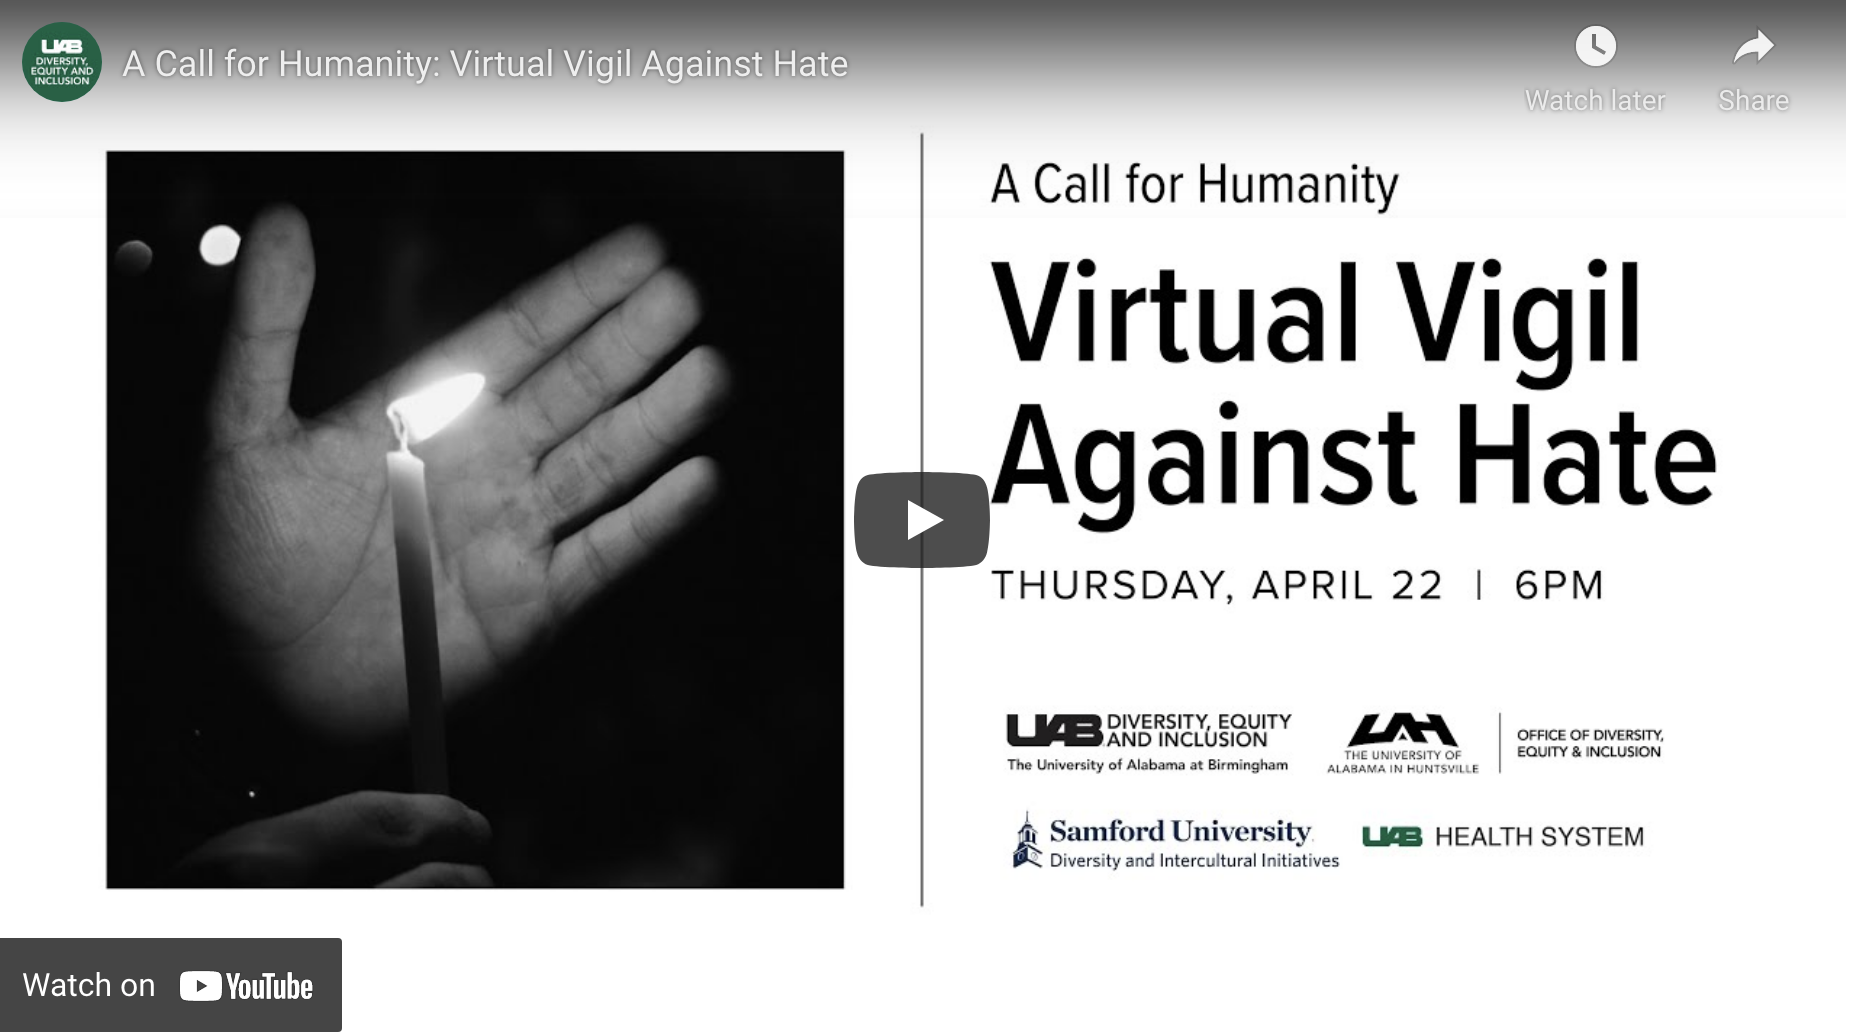 A Call for Humanity: Virtual Vigil Against Hate